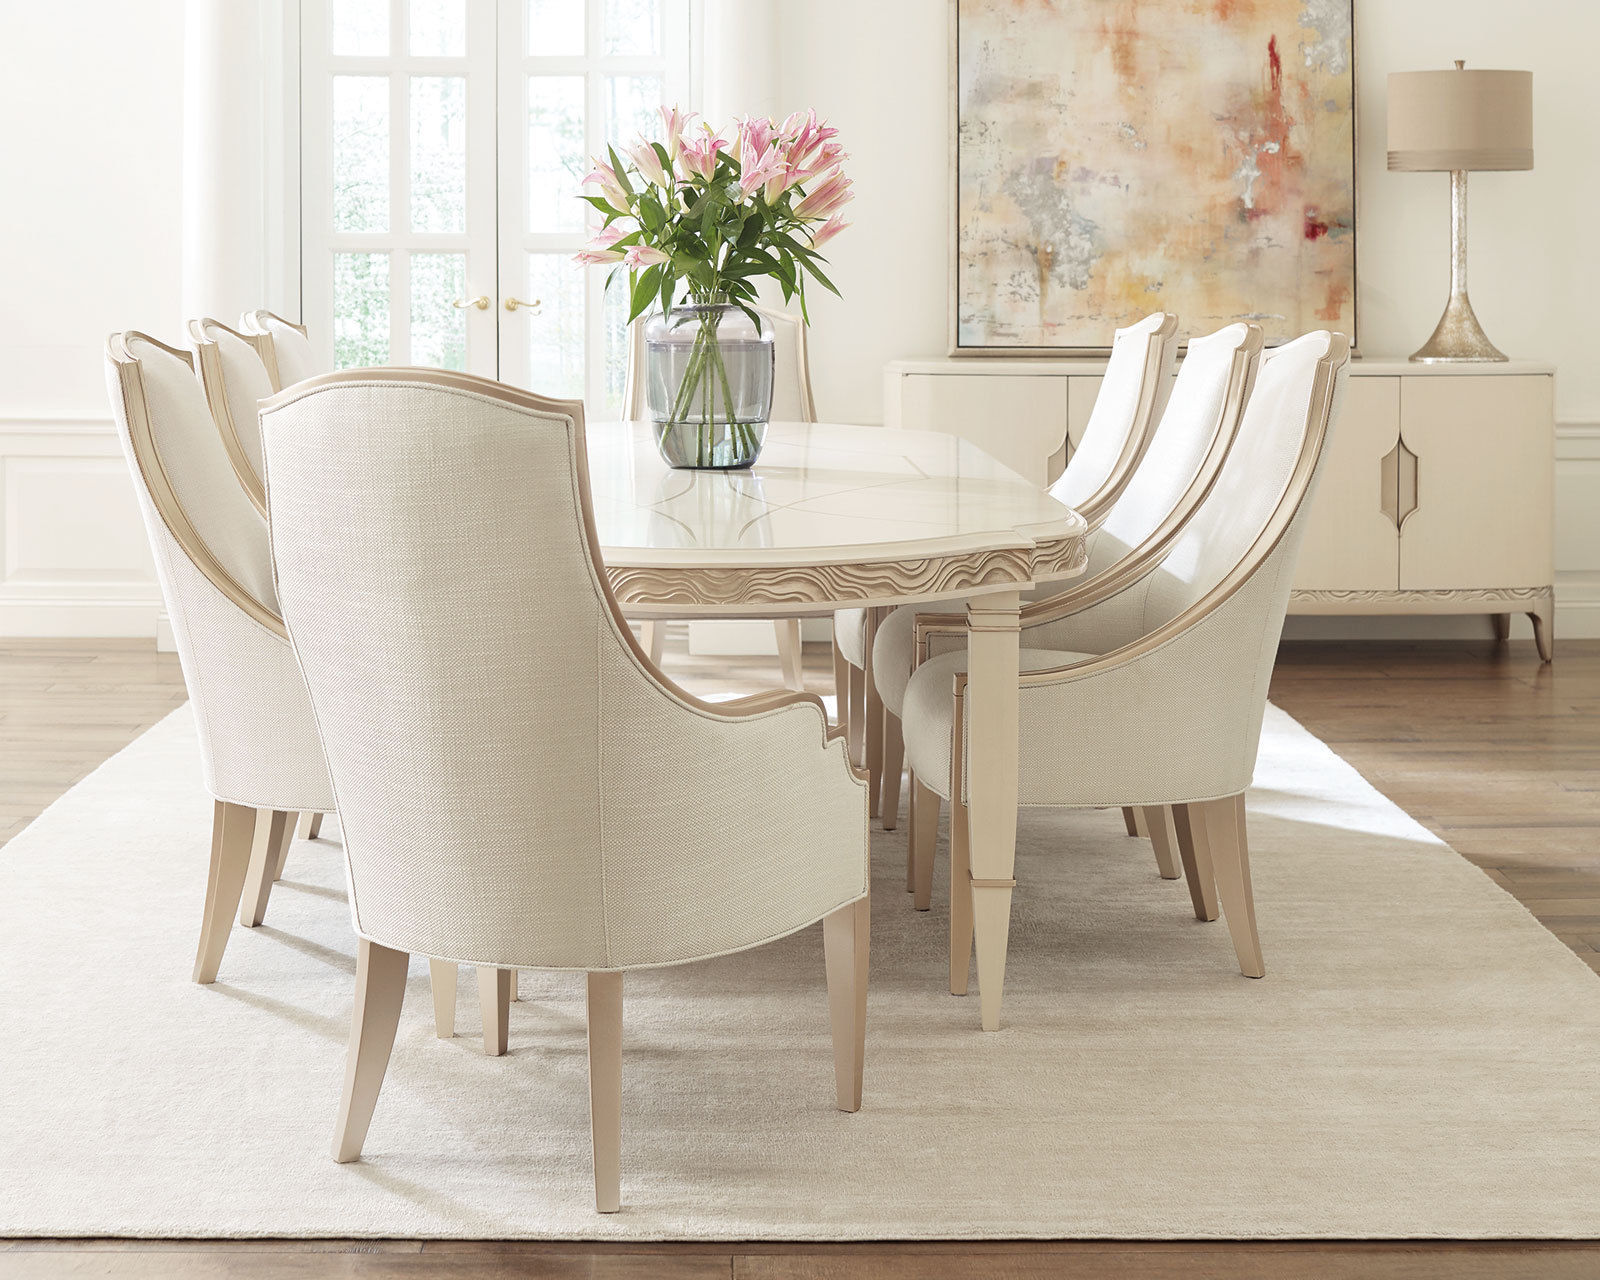 Cream Colored Formal Dining Room Sets